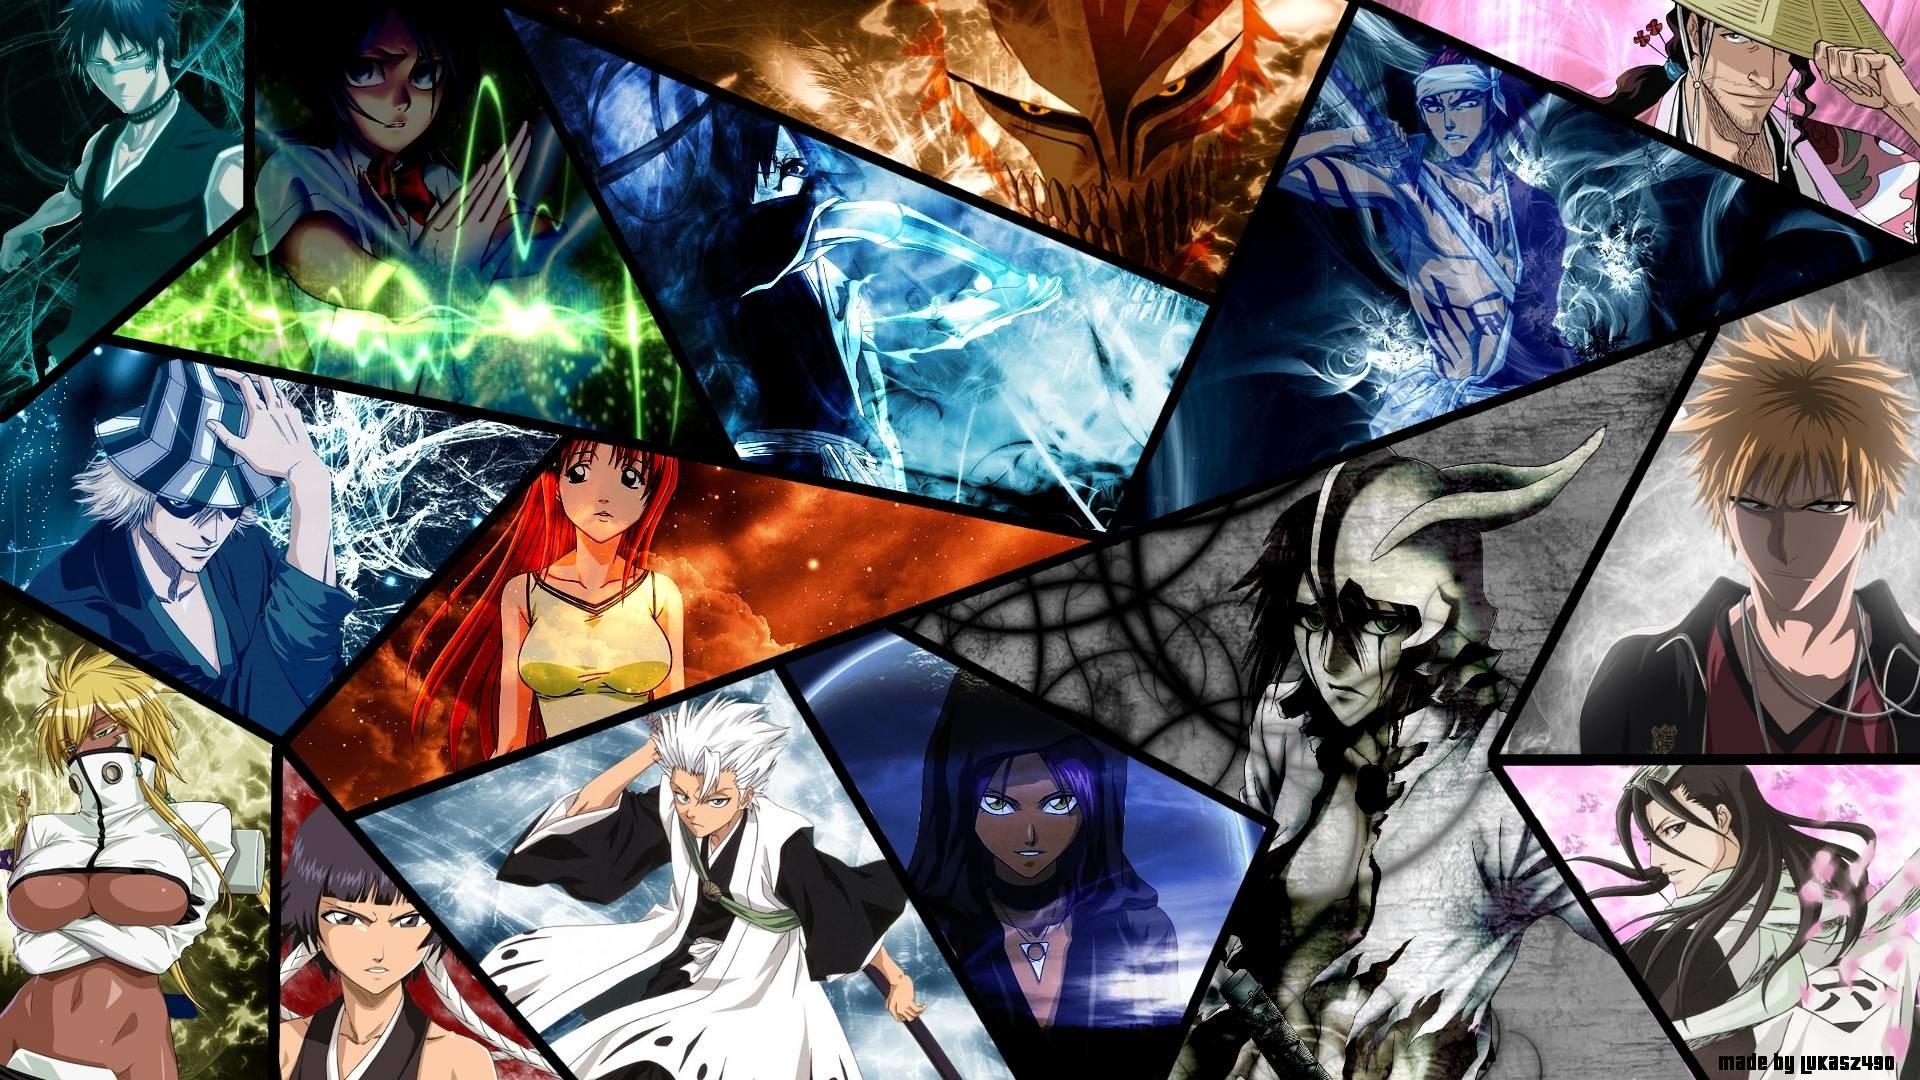 Many bleach characters